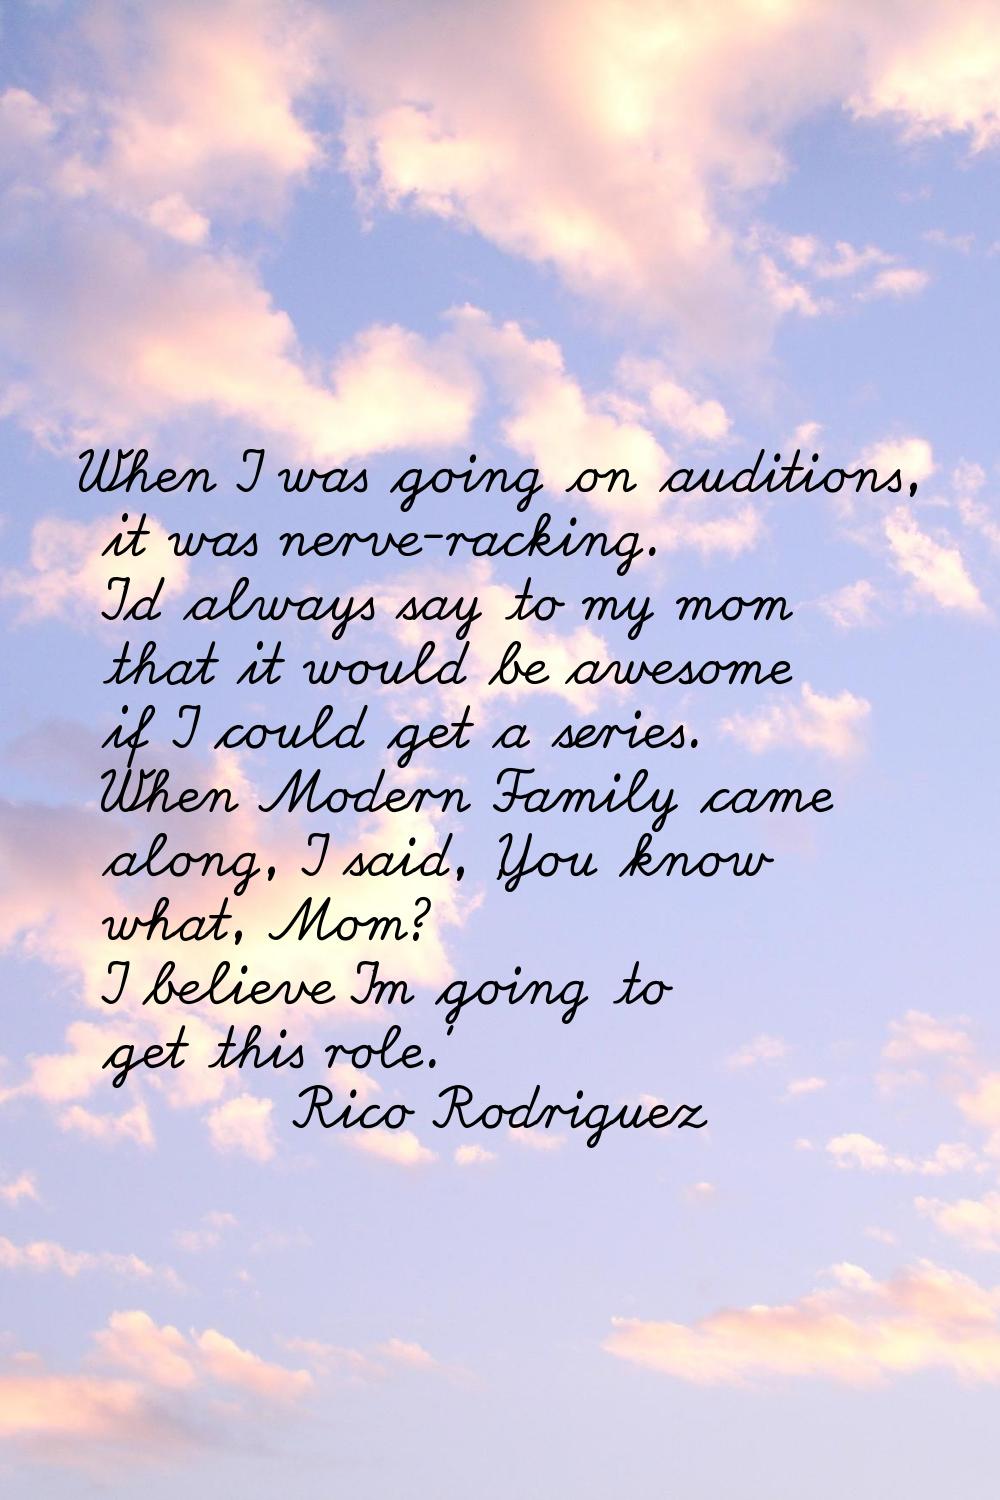 When I was going on auditions, it was nerve-racking. I'd always say to my mom that it would be awes